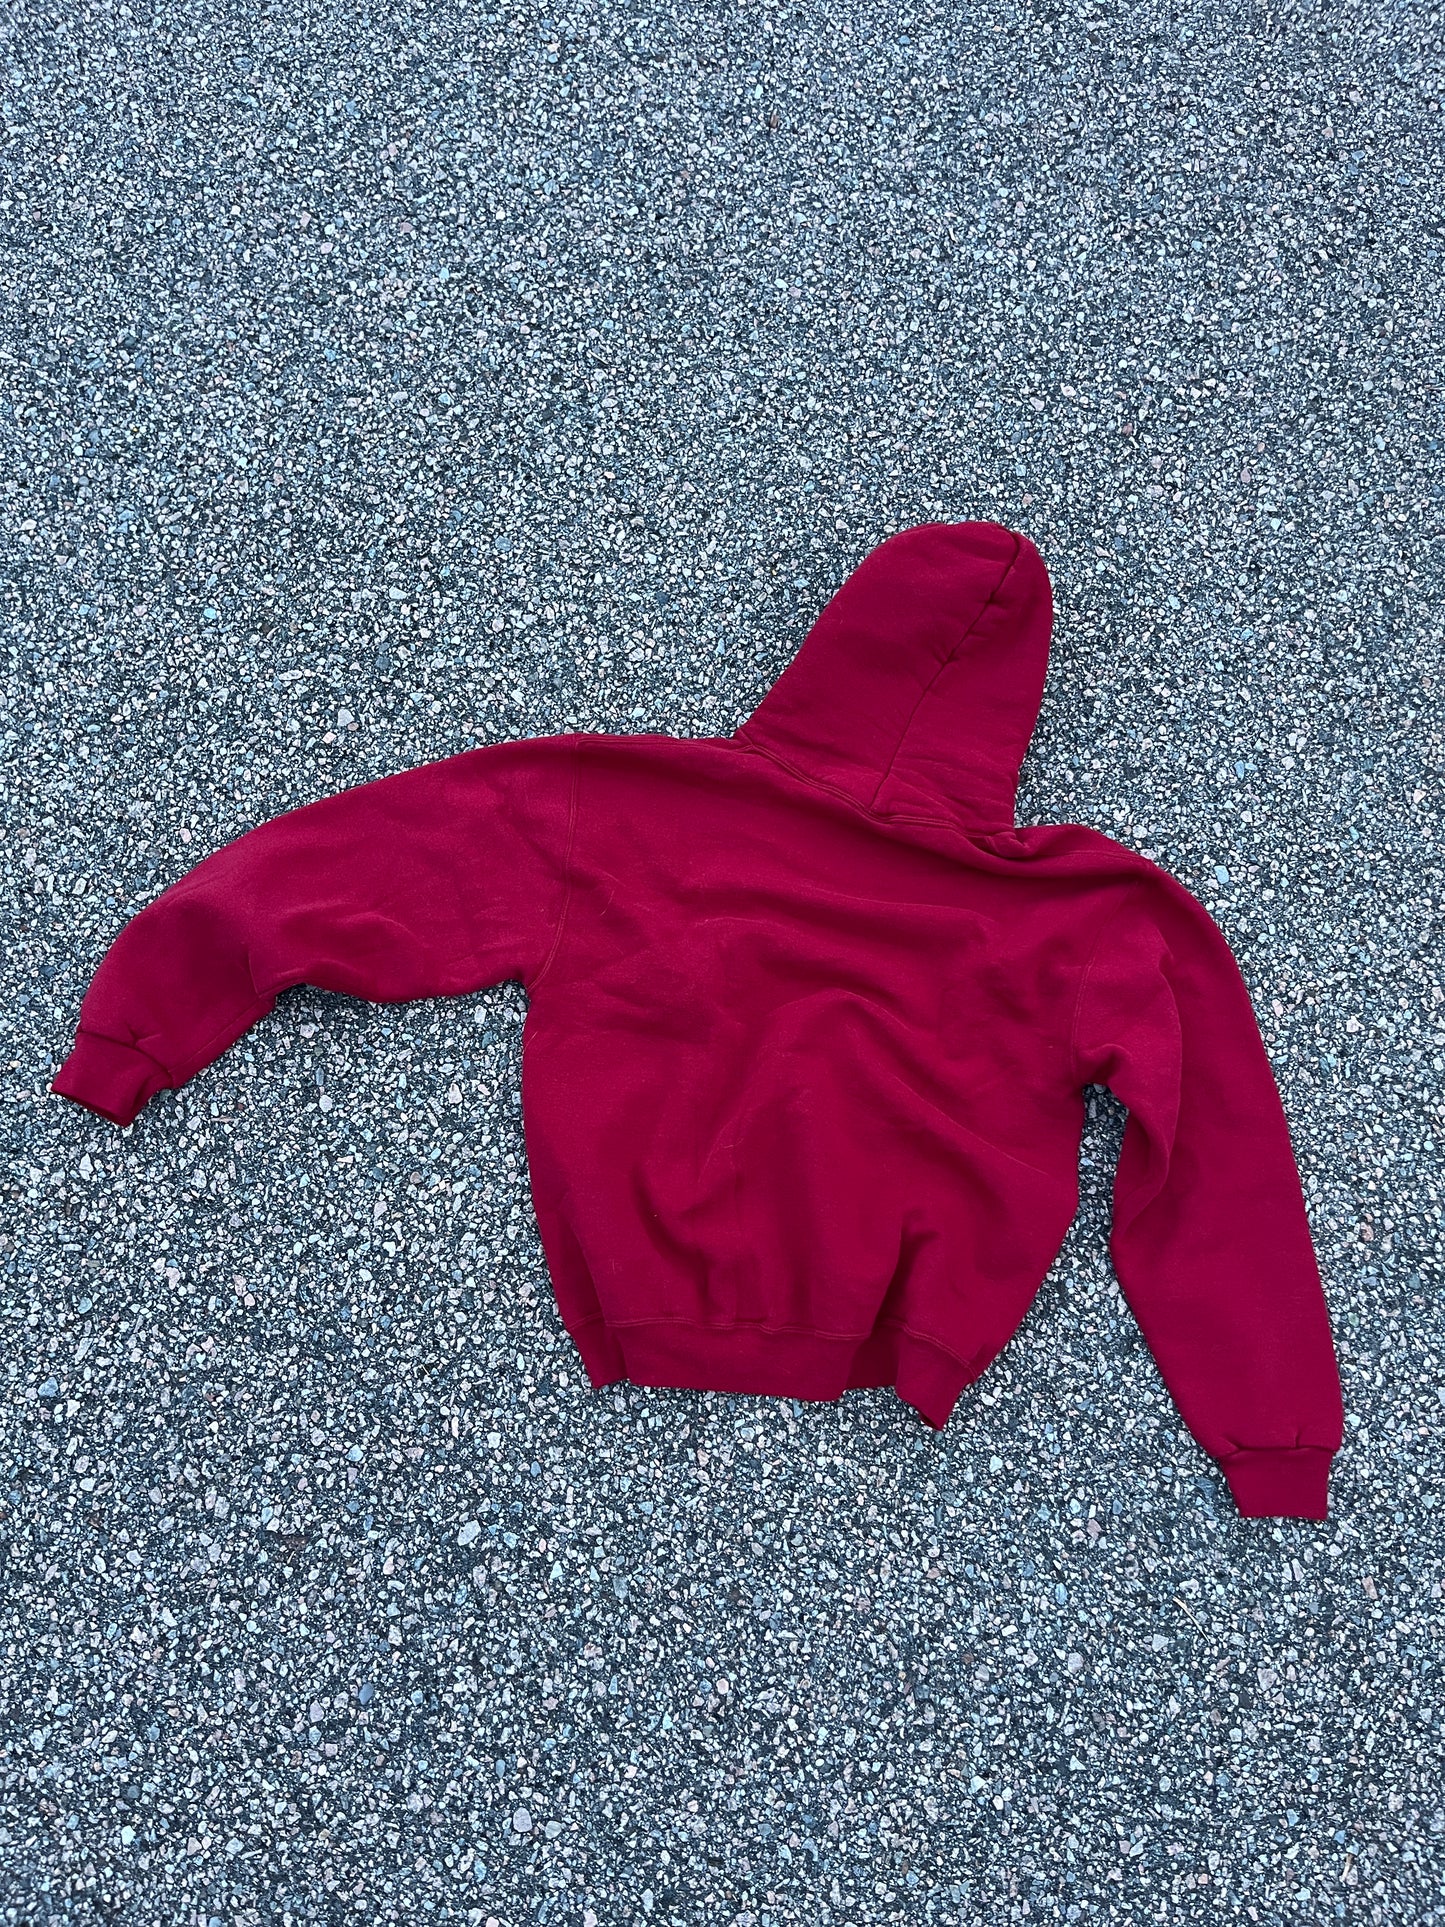 00’s Faded Red Russell Hoodie - Medium